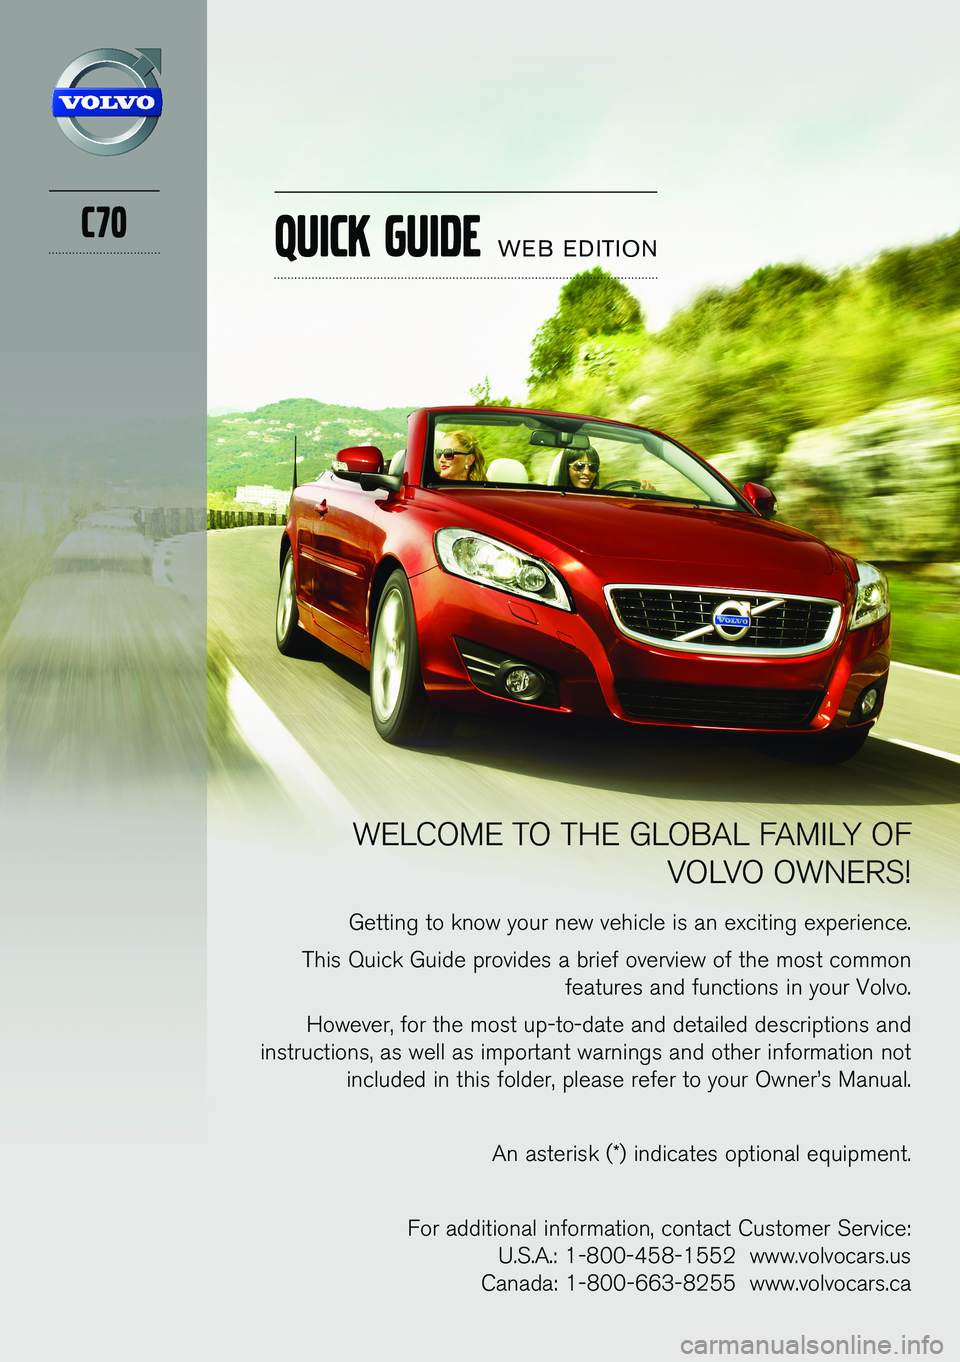 VOLVO C70 2013  Quick Guide C70
WELCOME TO THE GLOBAL FAMILY OF VOLVO OWNERS!
Getting to know your new vehicle is an exciting experience.
This Quick Guide provides a brief overview of the most common  features and functions in y